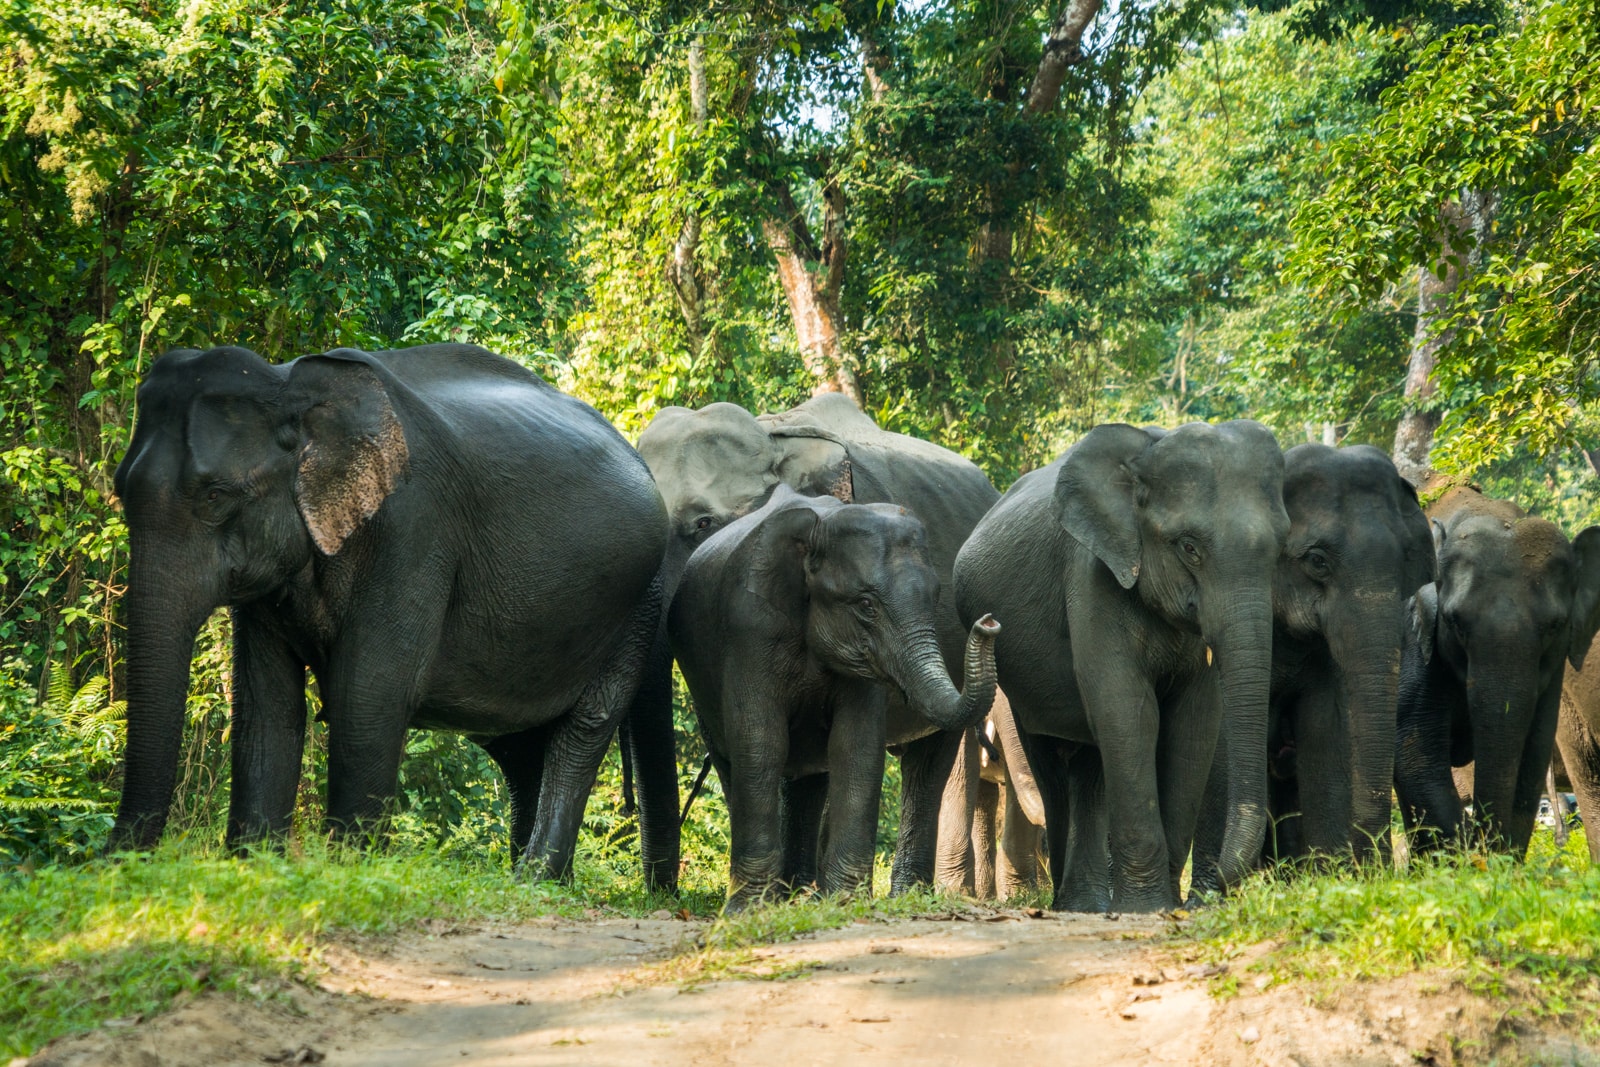 River cruising with Assam Bengal Navigation in India - Herd of wild elephants crossing the road in Kaziranga National Park - Lost With Purpose travel blog